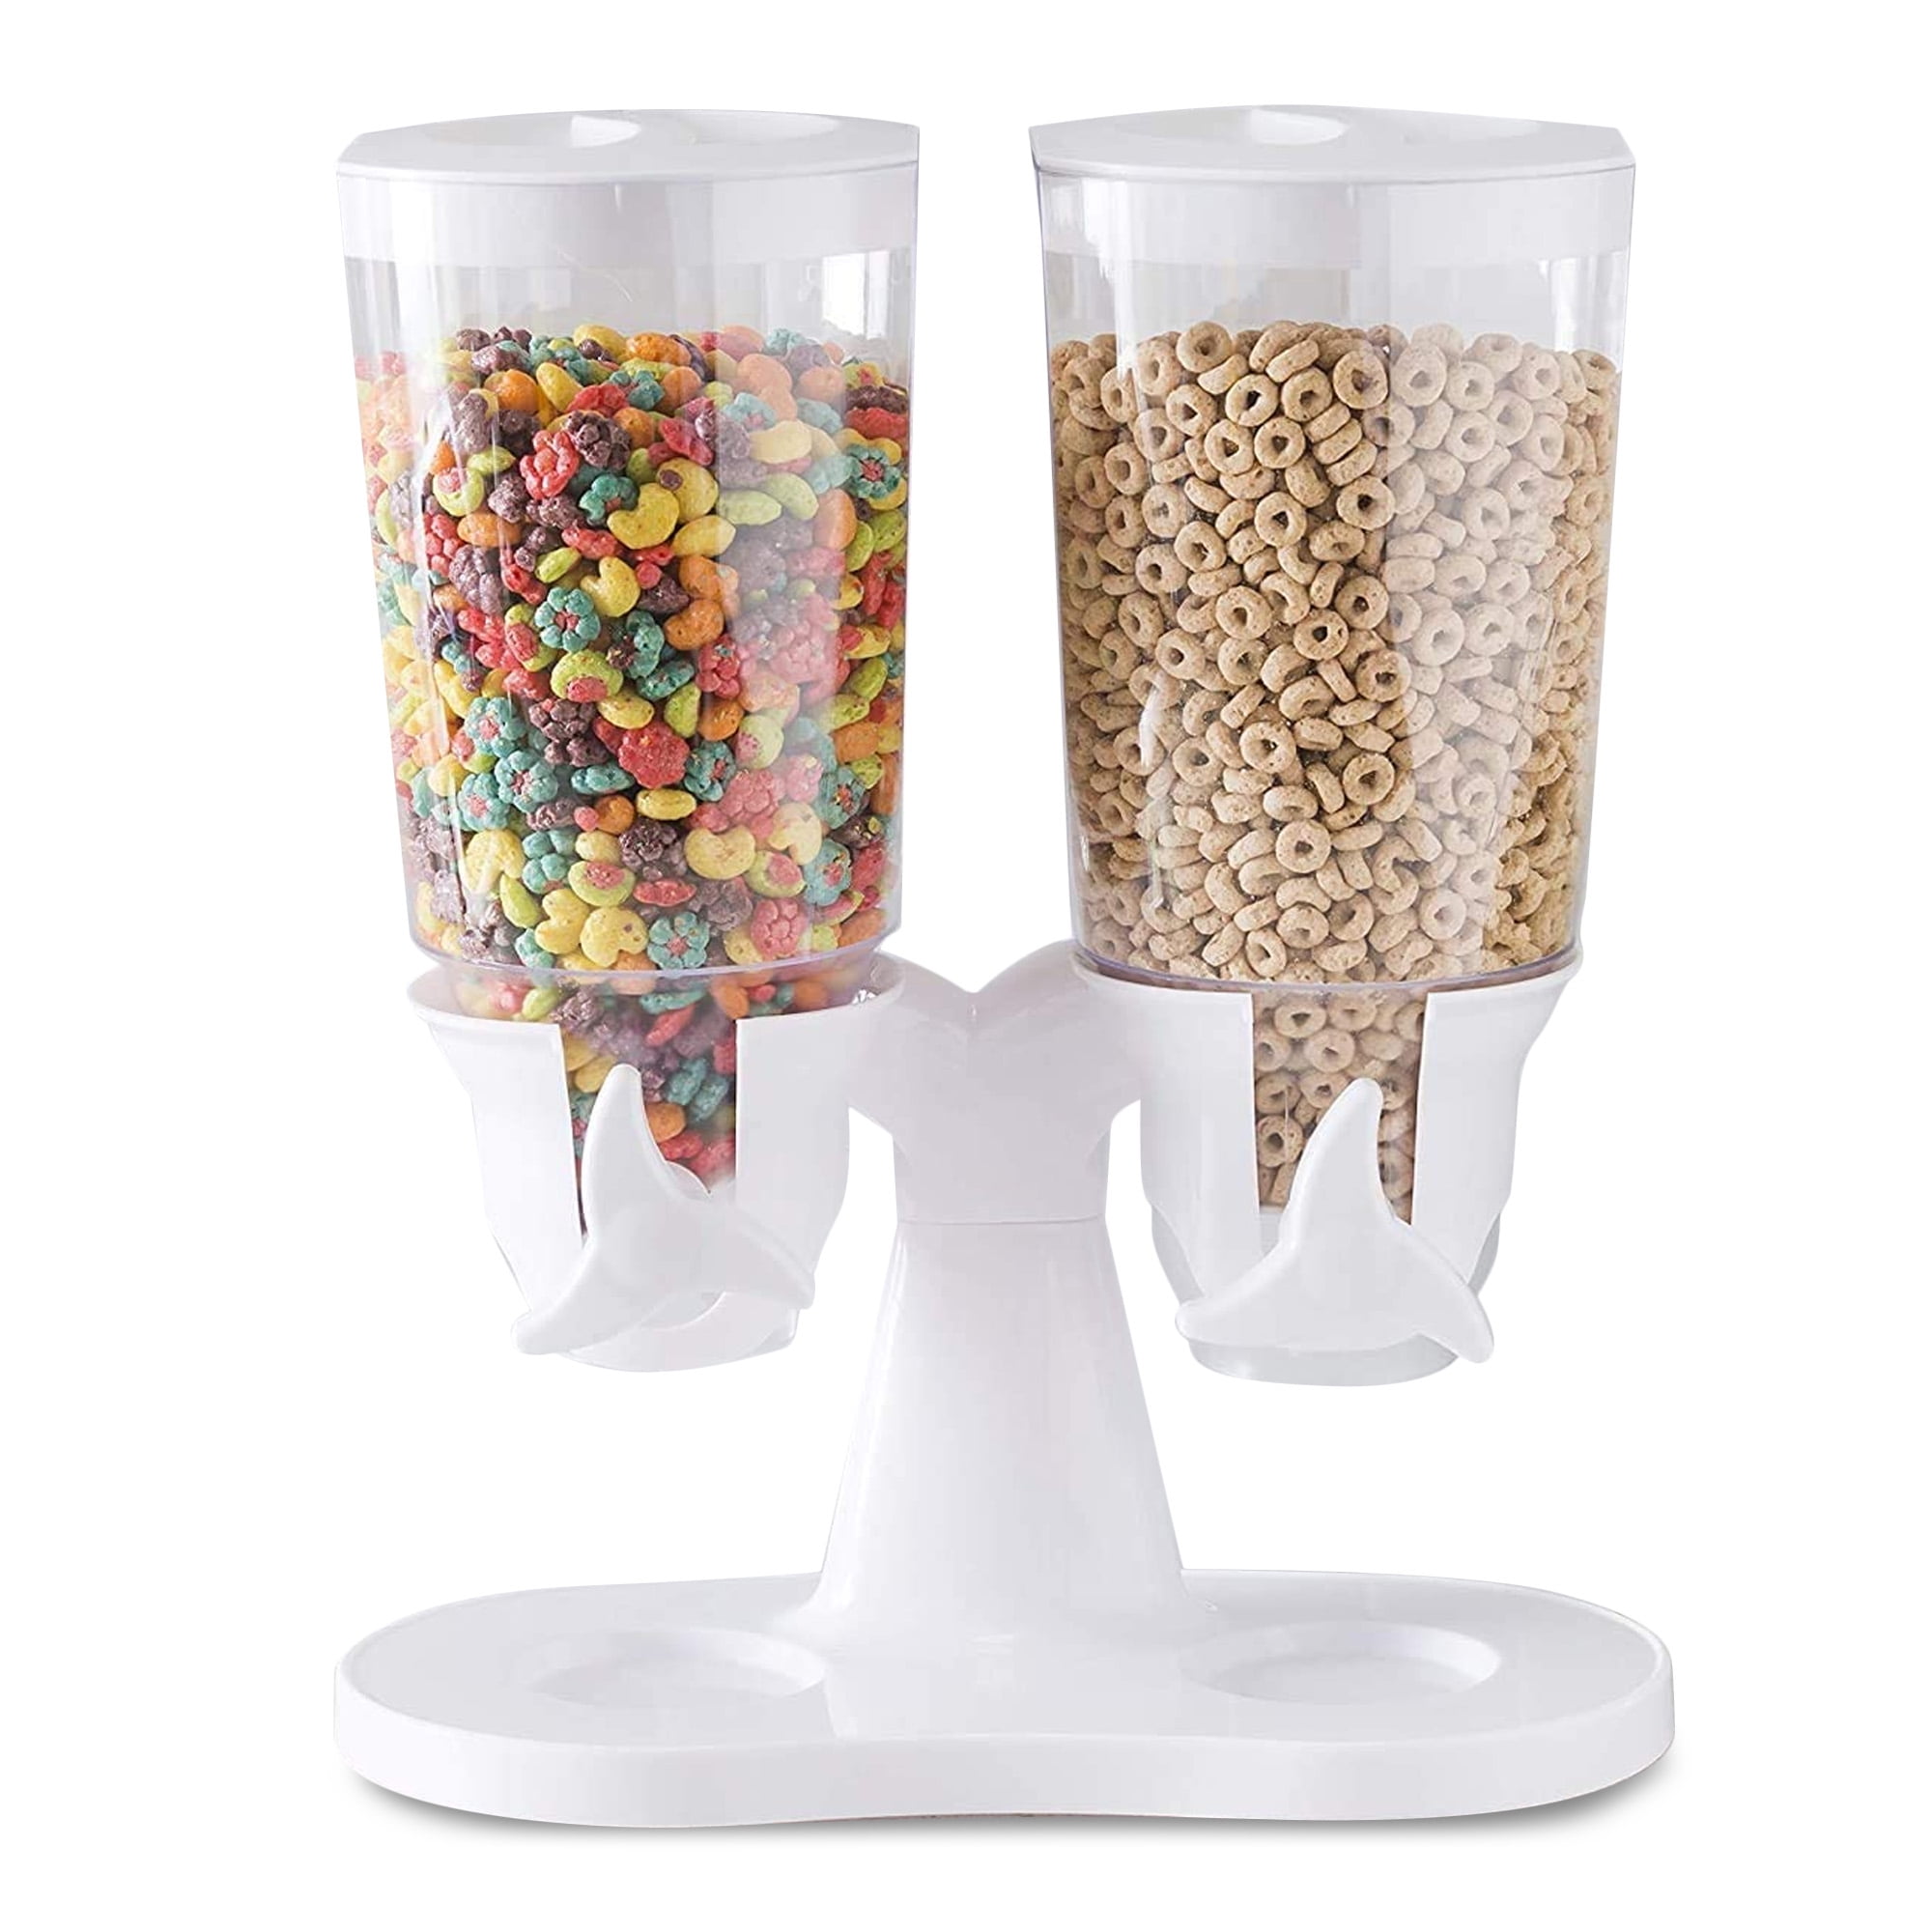 Double Dispenser for Cereals United Entertainment Cereal Dispenser Silver Cereal Dispenser Cornflakes and Cereals 